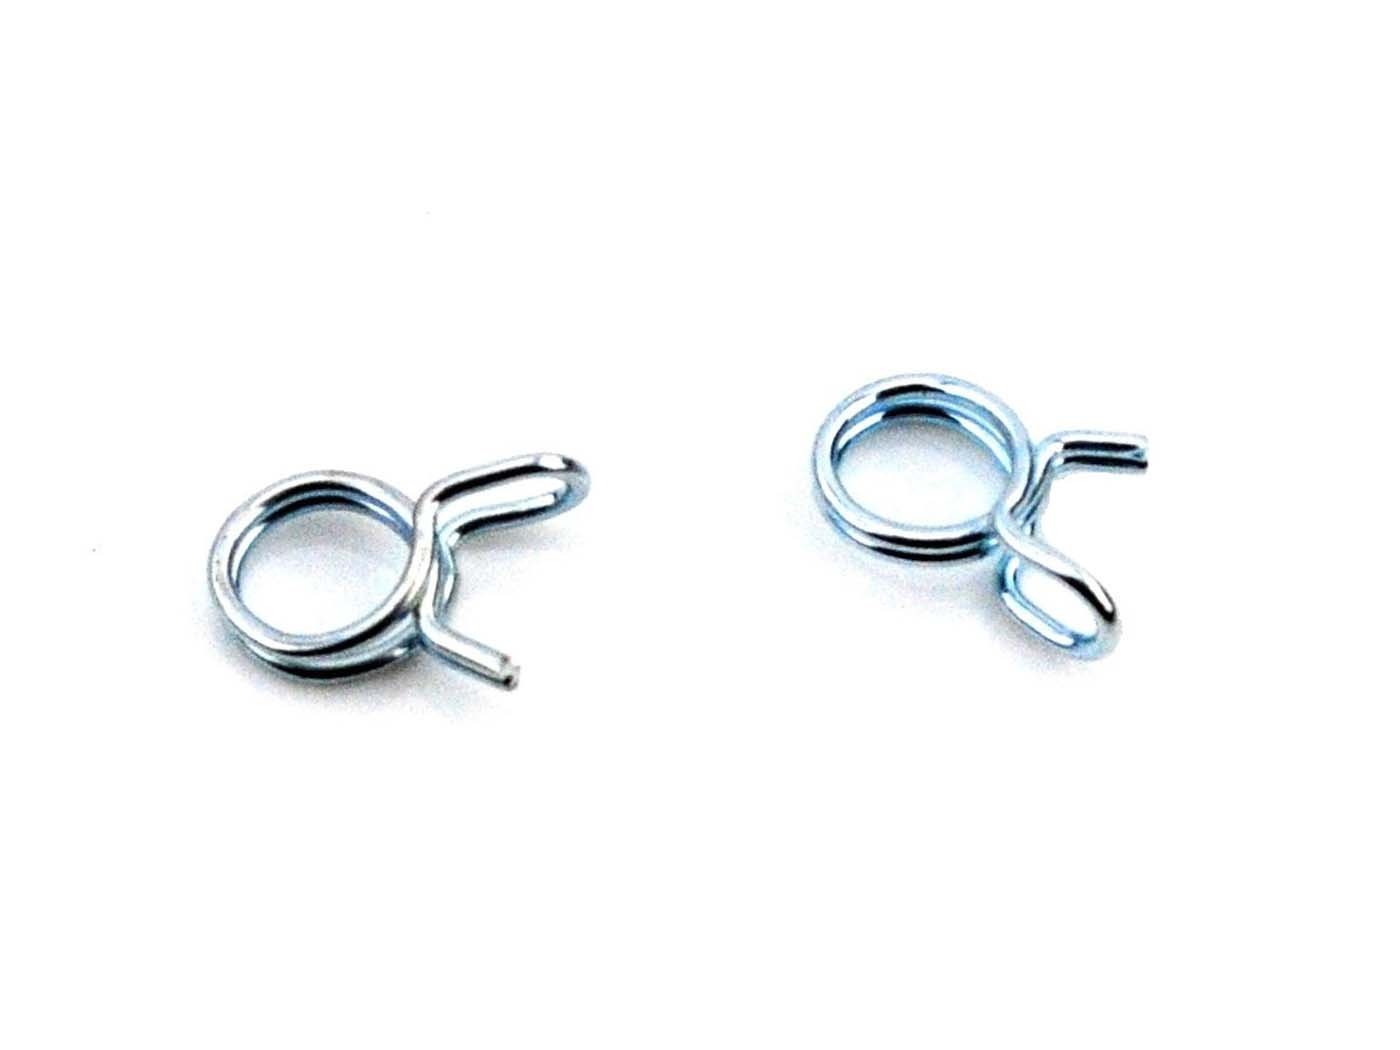 Fuel Hose Clamp Set 8-9mm For Moped Moped Mokick